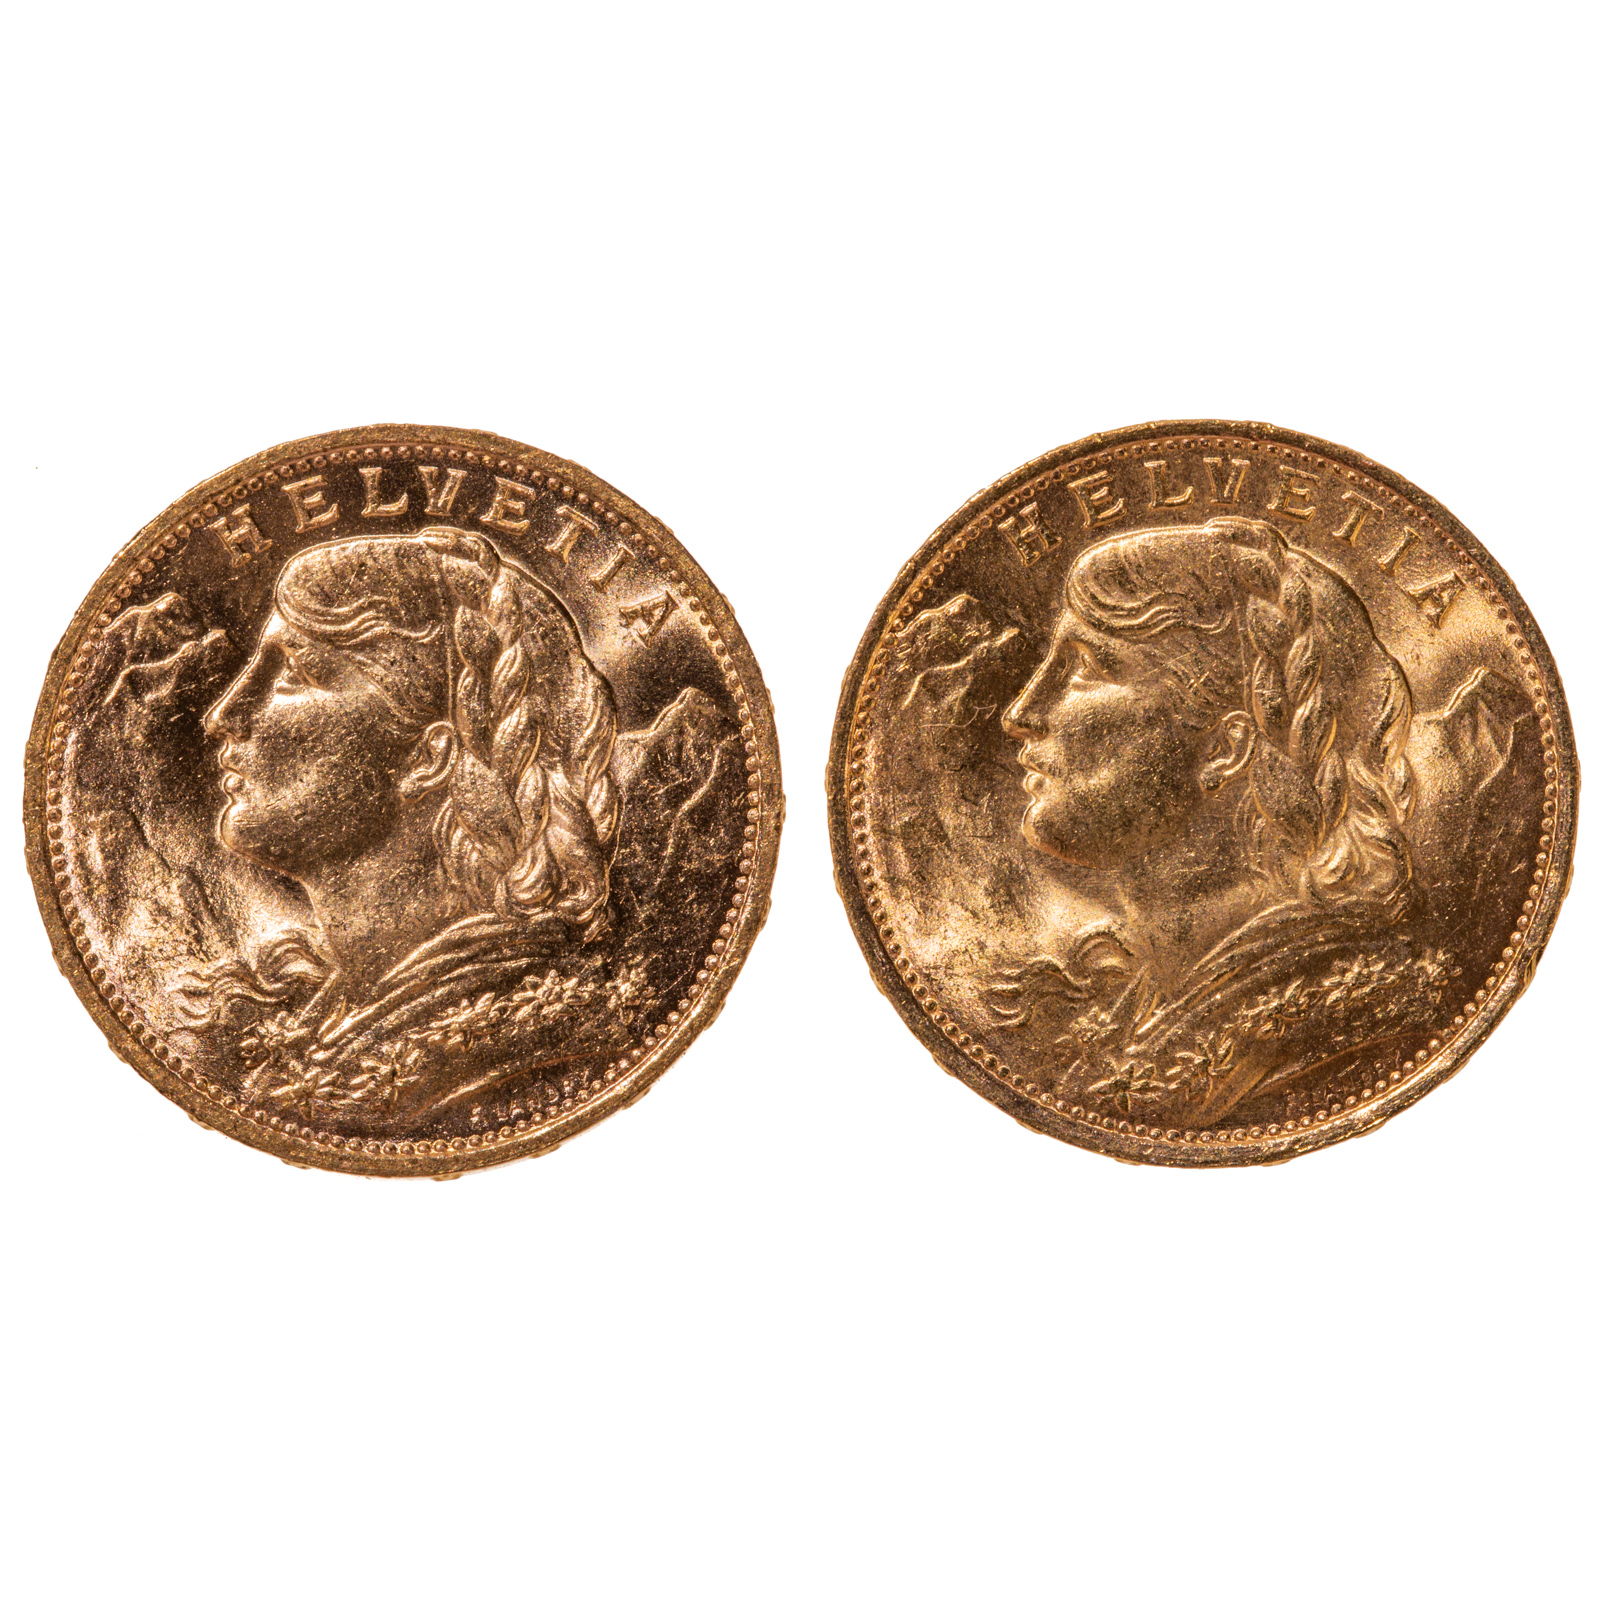 A PAIR OF SWISS GOLD 20 FRANCS